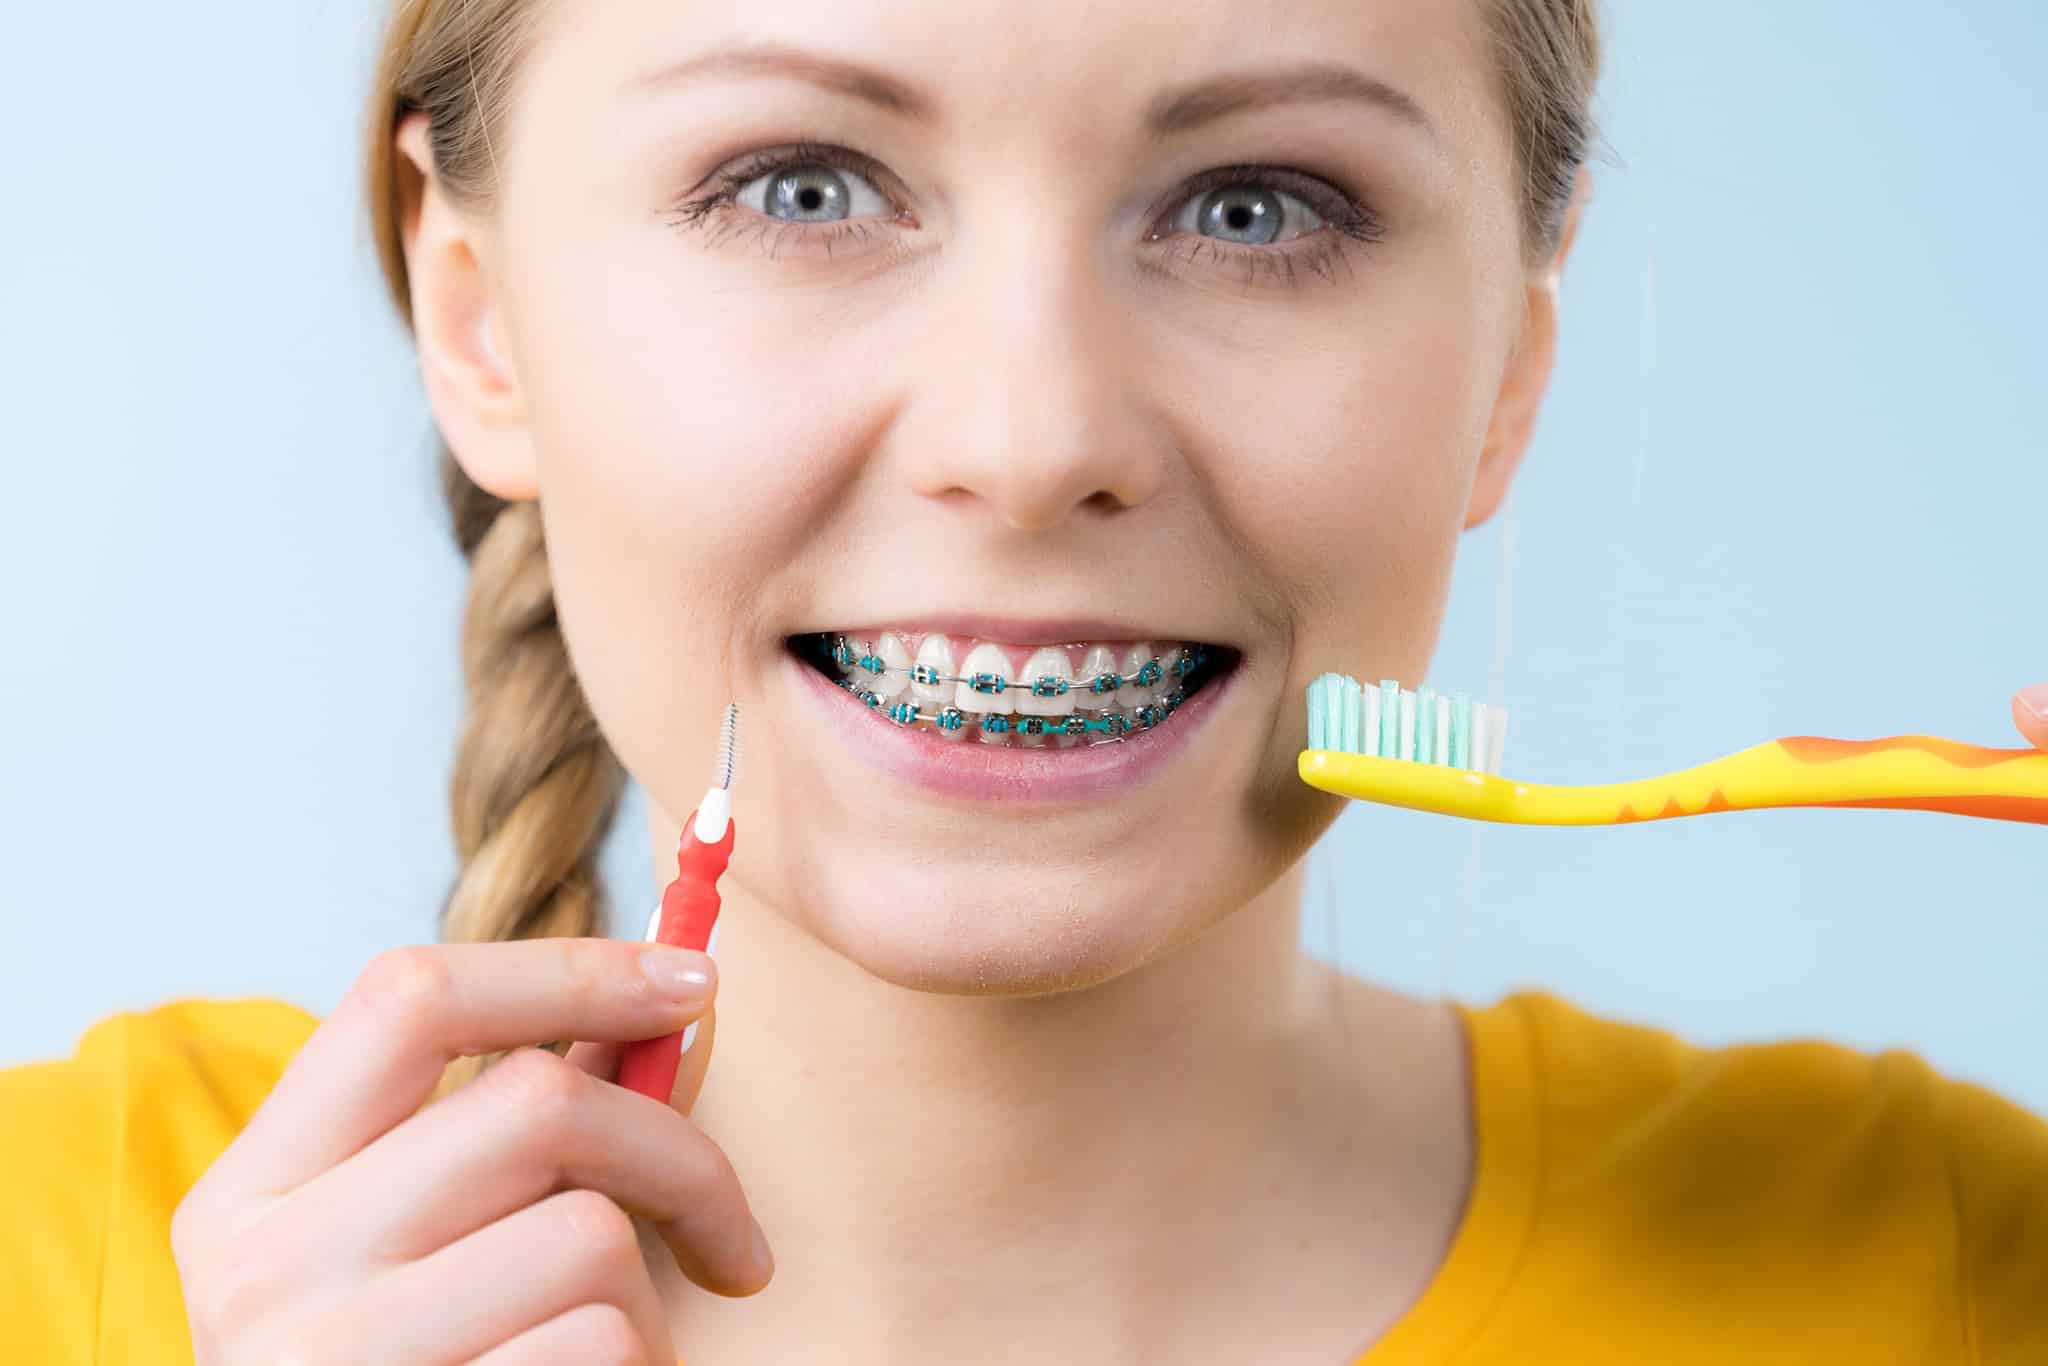 A photograph of a girl with braces holding a toothbrush and dental pick.